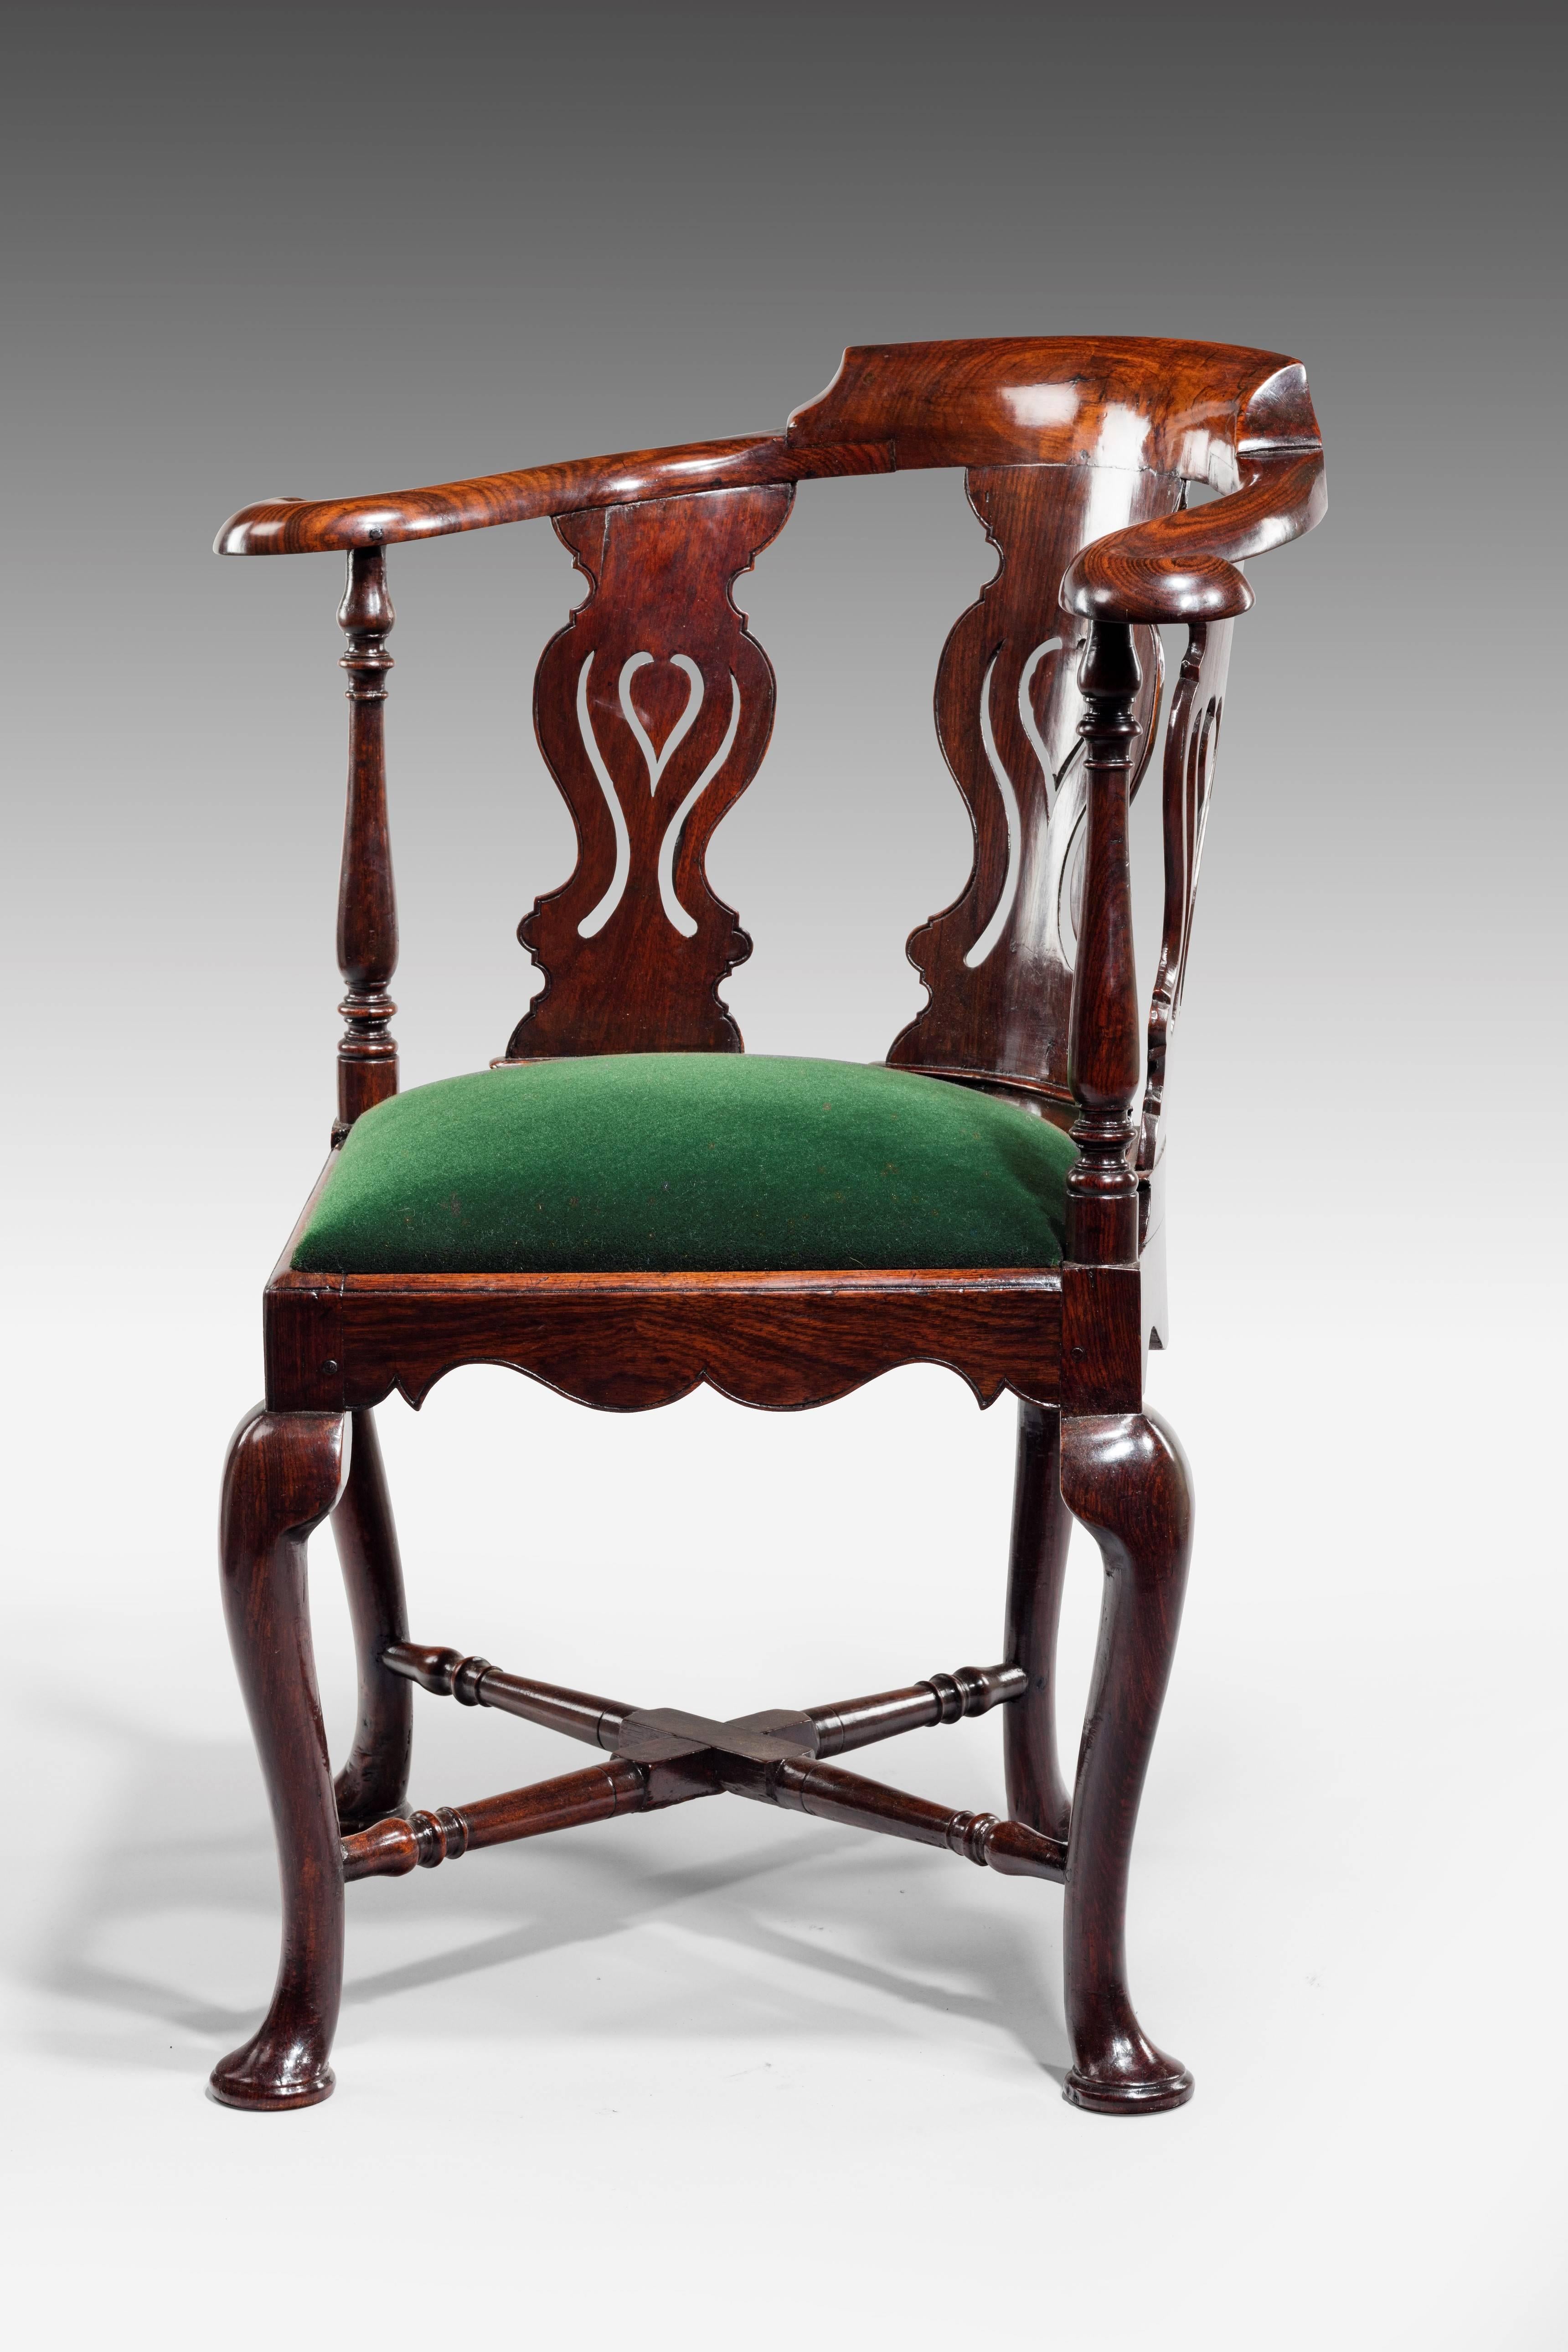 Attributed to a Chinese chair maker working in Goa, India, circa 1765.

With triple pierced splats decorated with pierced ruyi-head, flanked by scrolling arms, scalloped edges to the seat rails and standing on cabriole legs joined by X-frame